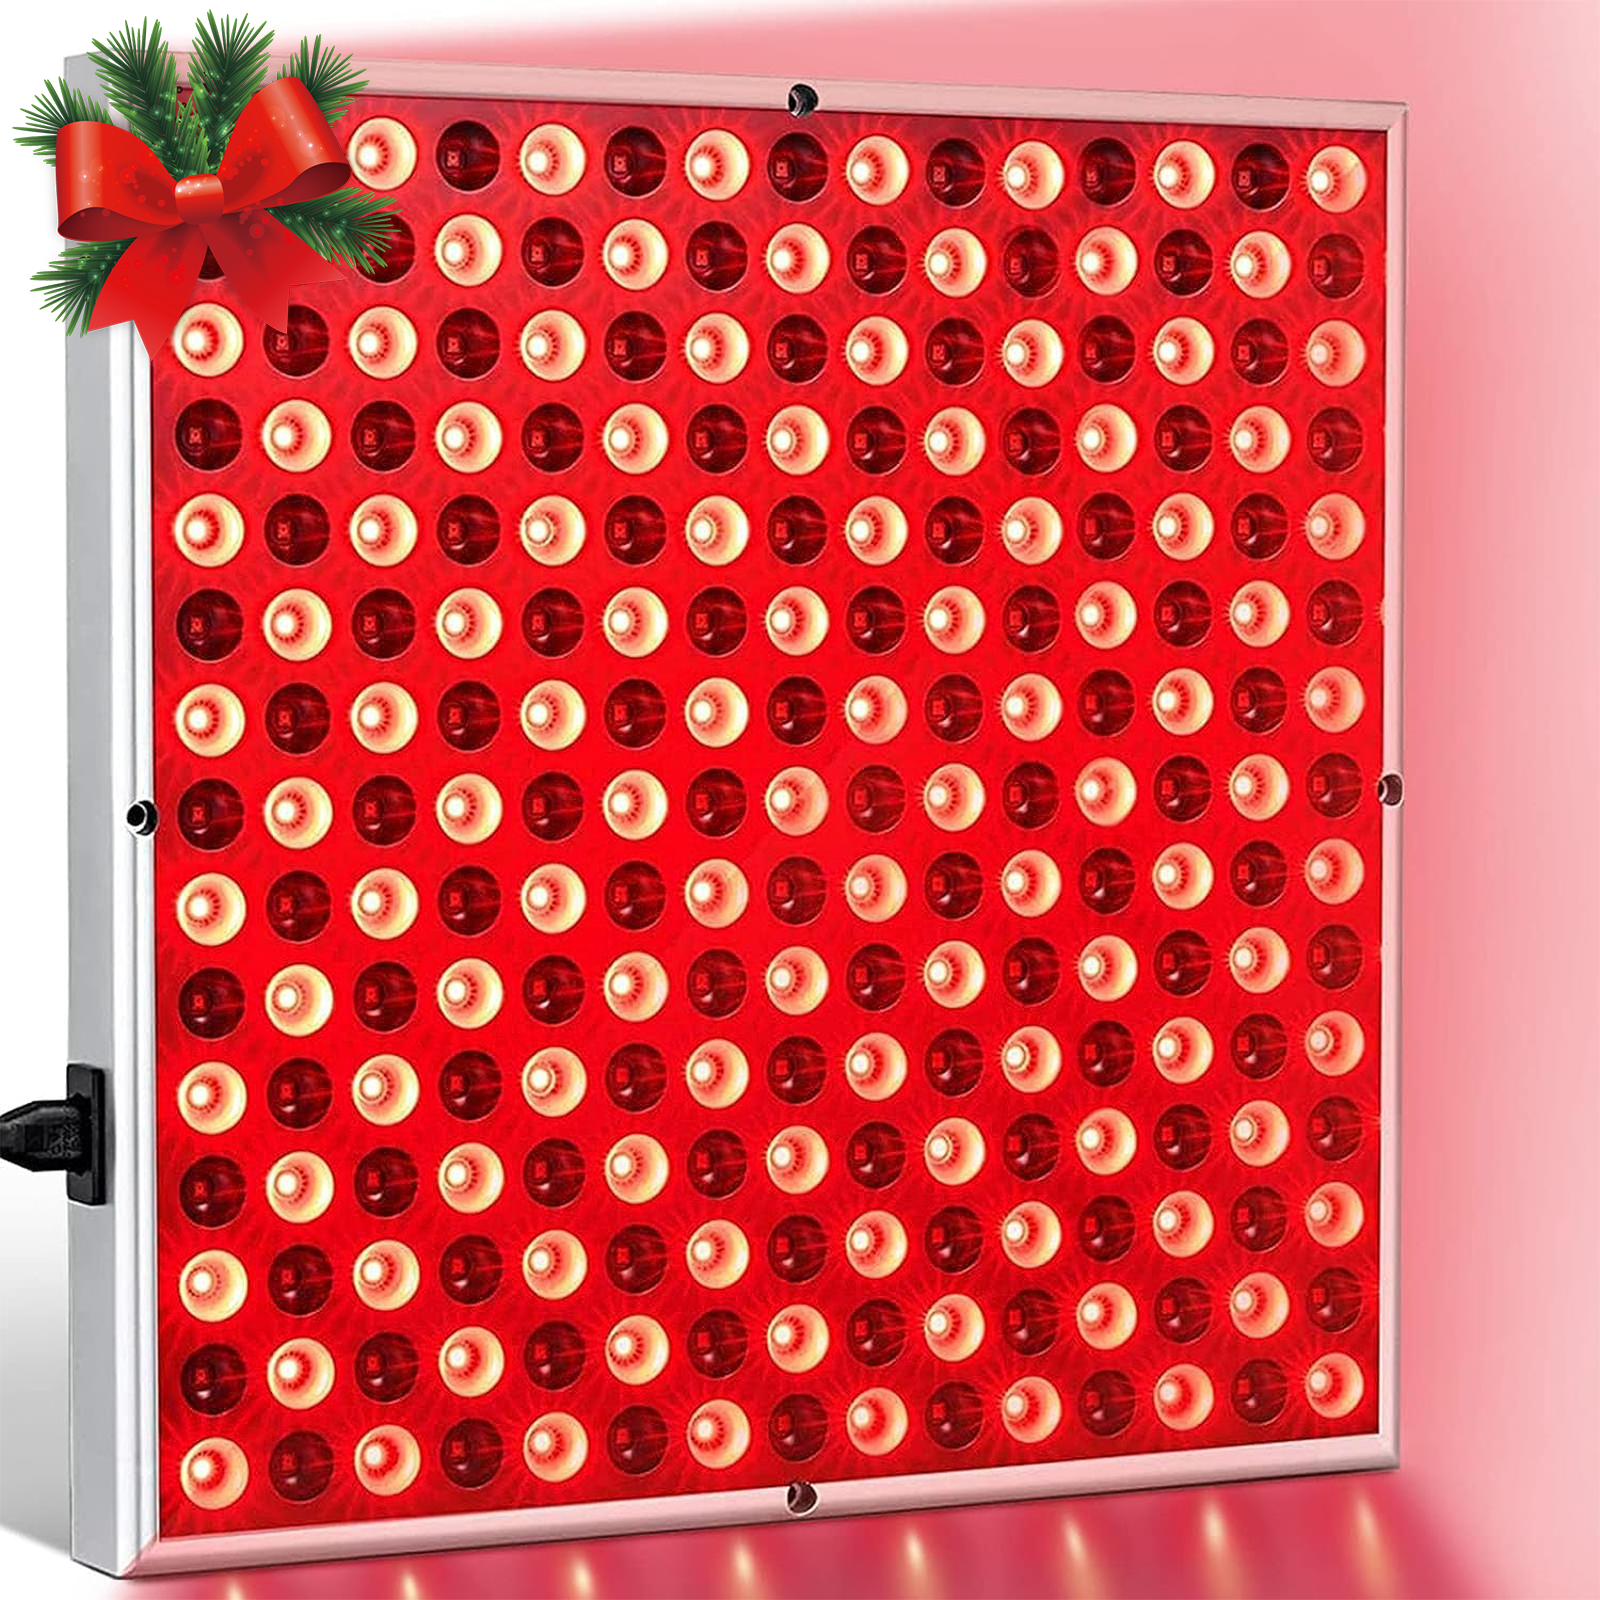 Infrared Red Light Therapy Panel